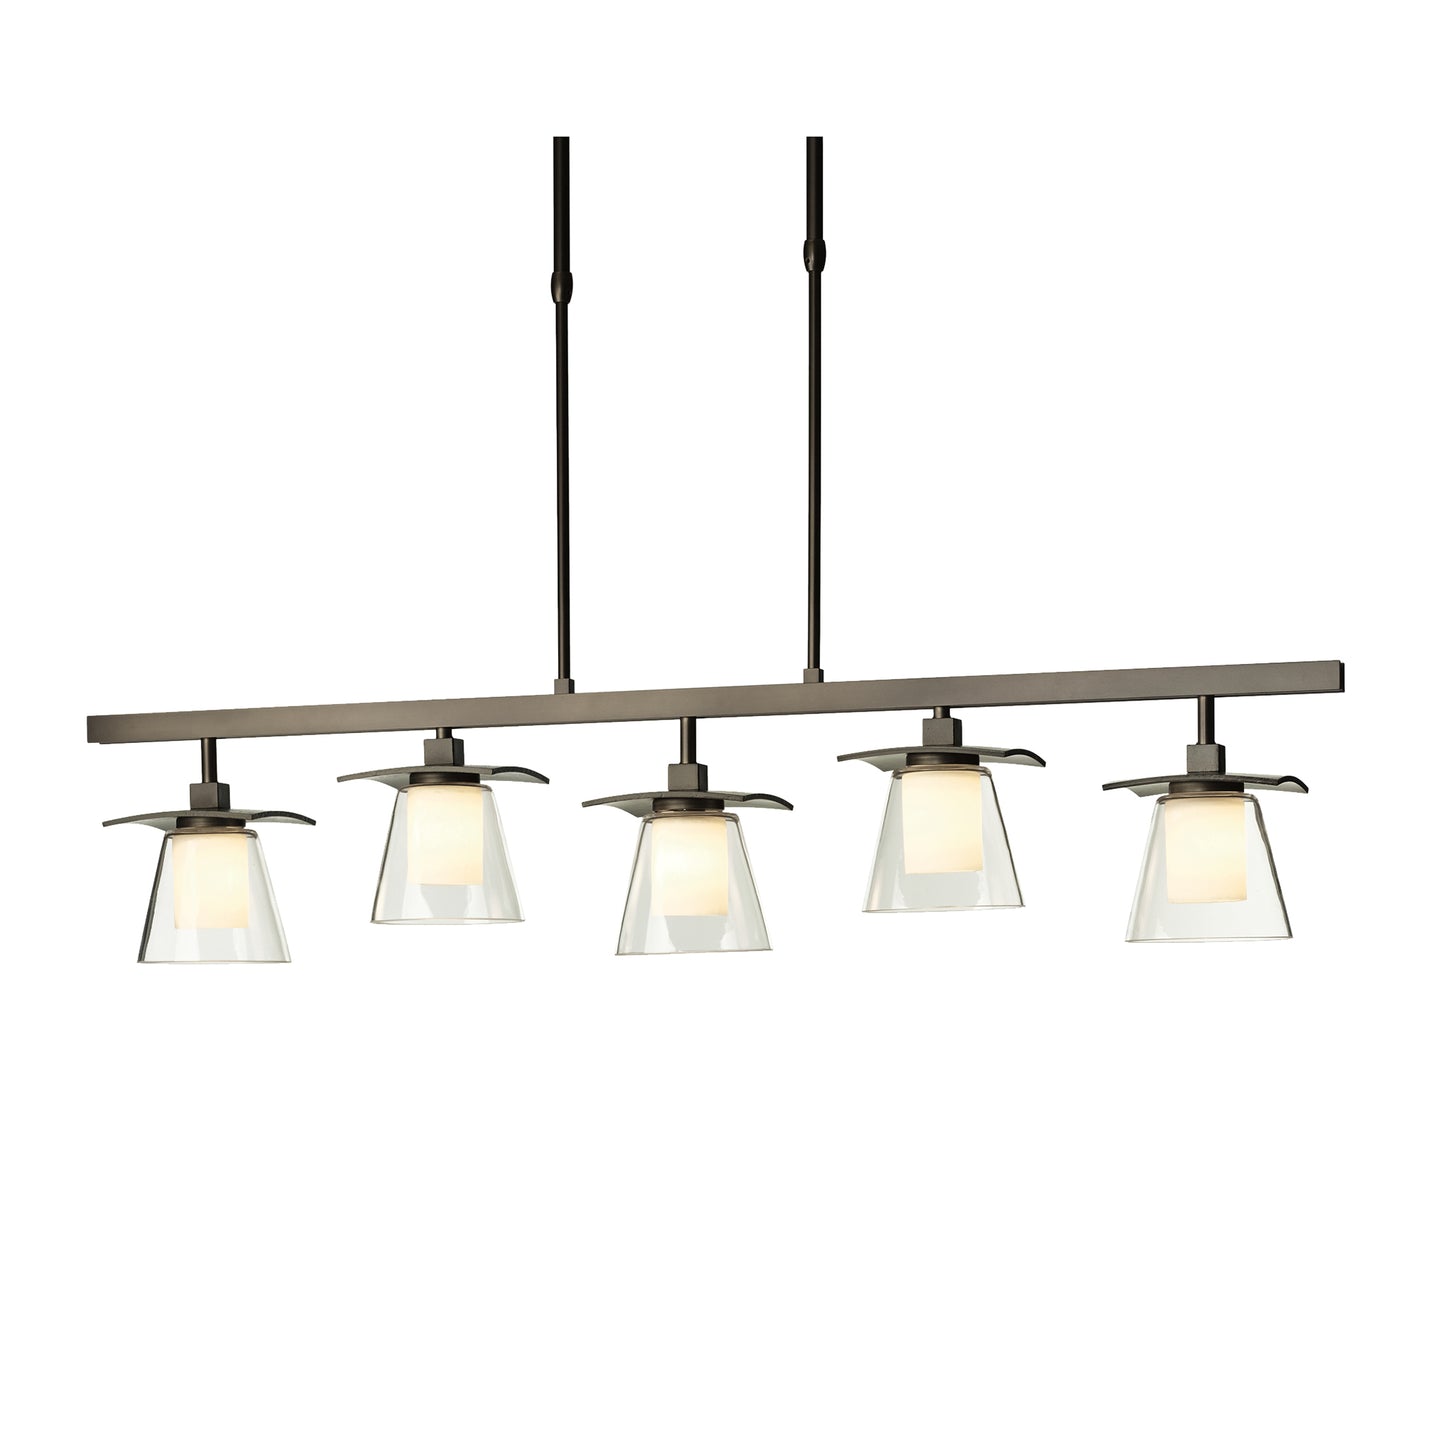 This handcrafted in Vermont light fixture, known as the Hubbardton Forge Wren 5-Light Pendant, features a glass shade and four lights.